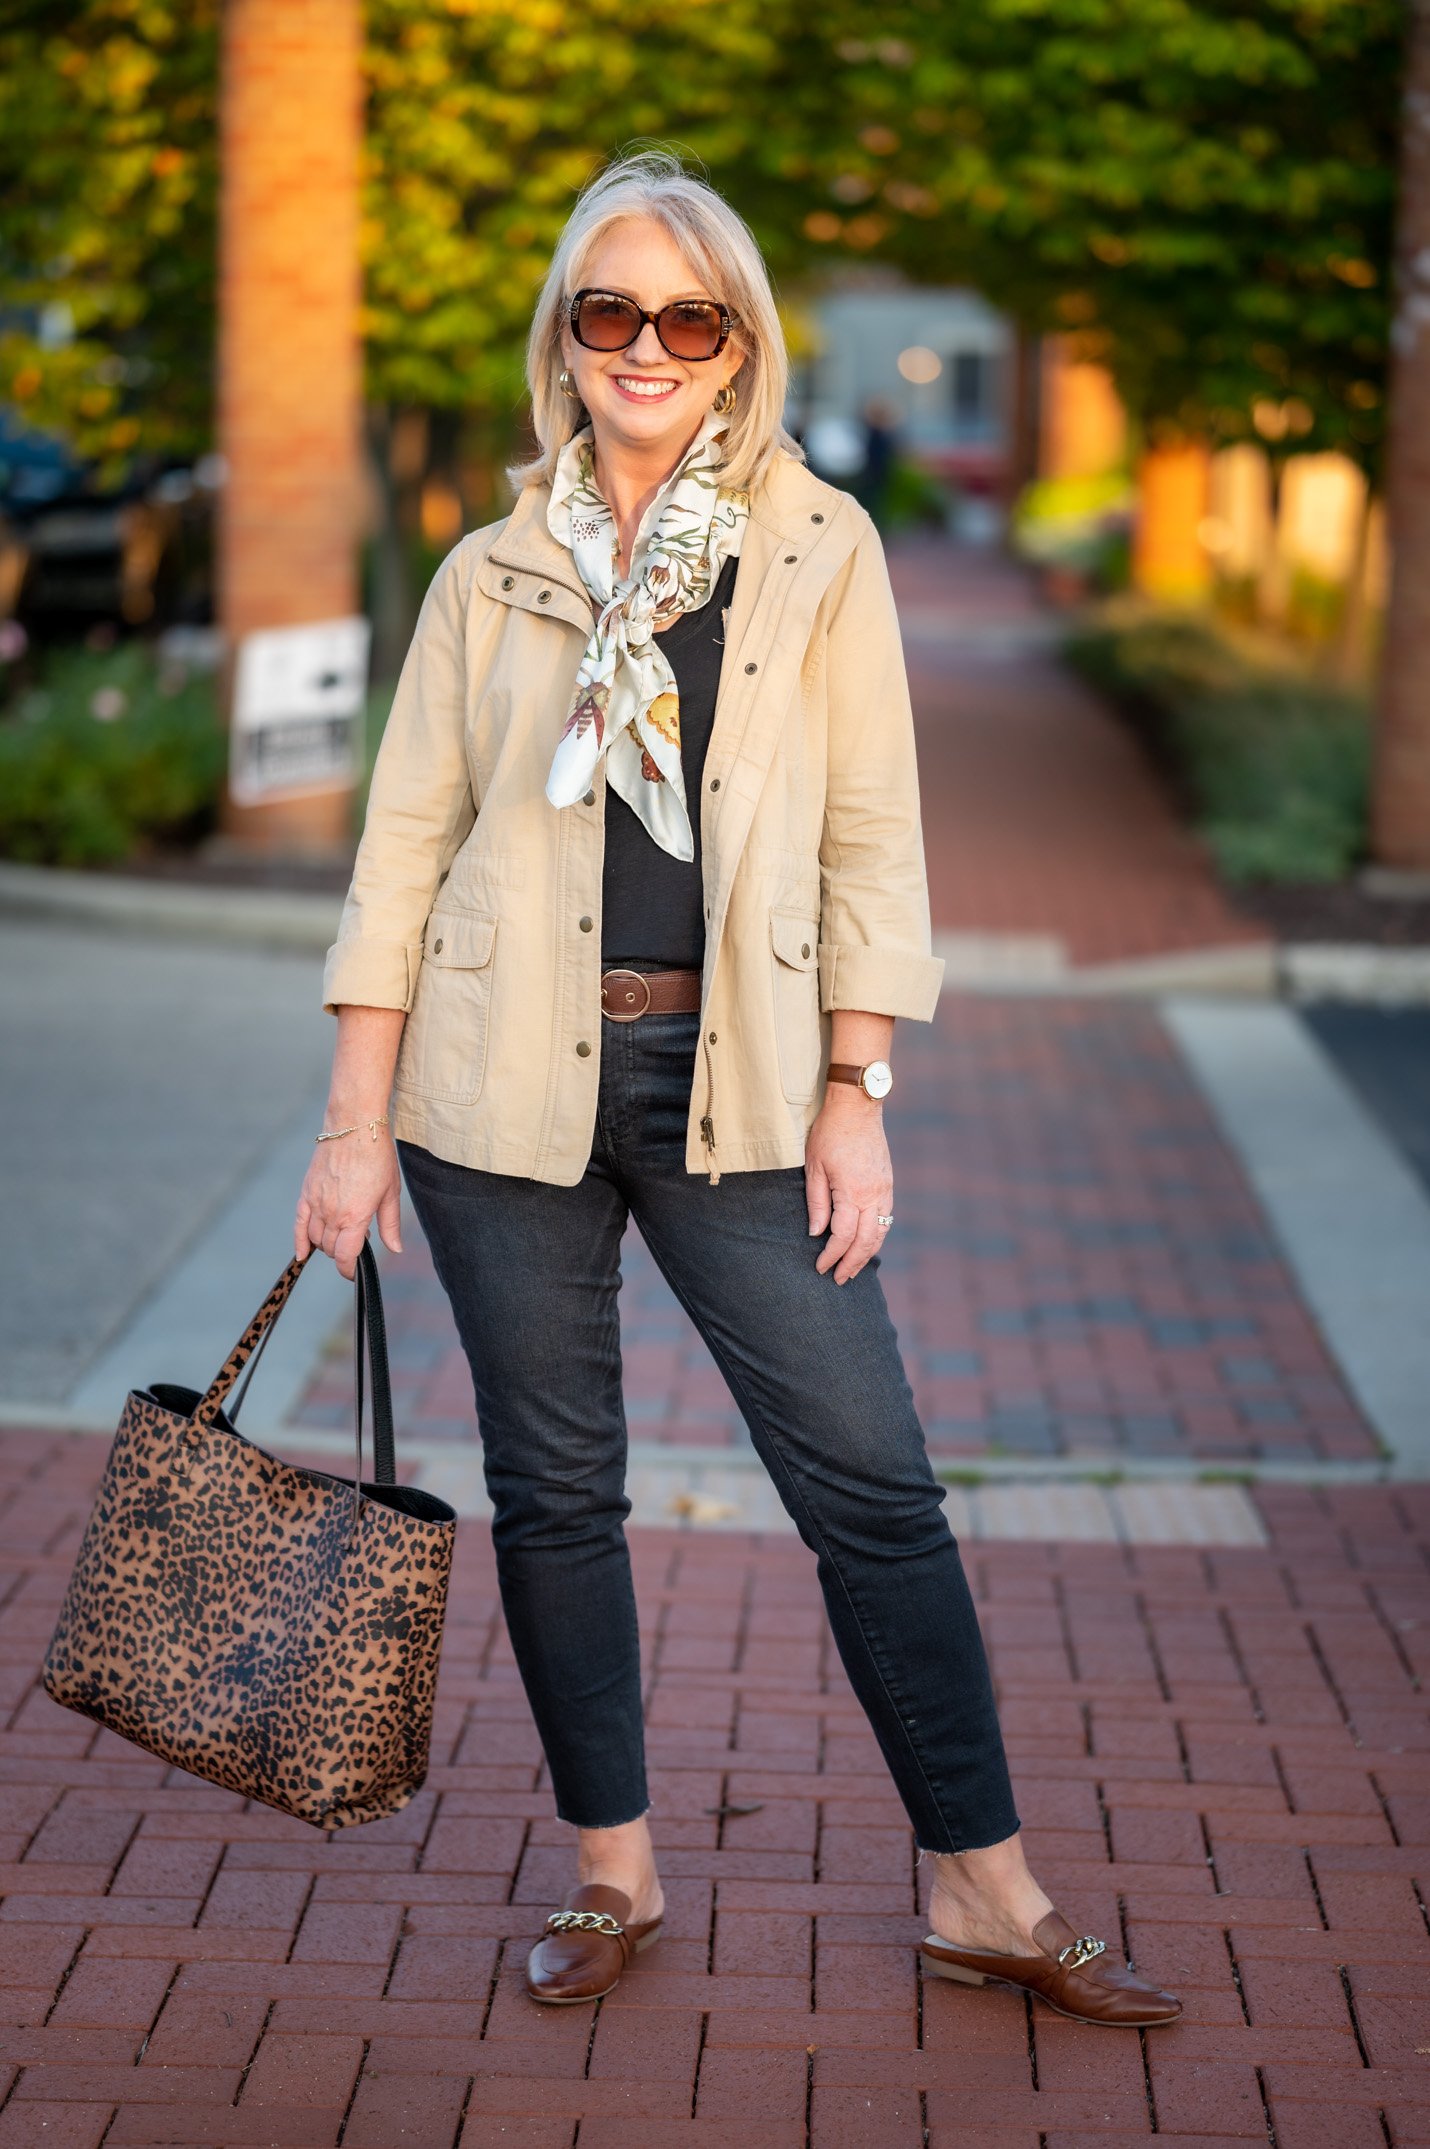 Mixing Neutrals for Fall